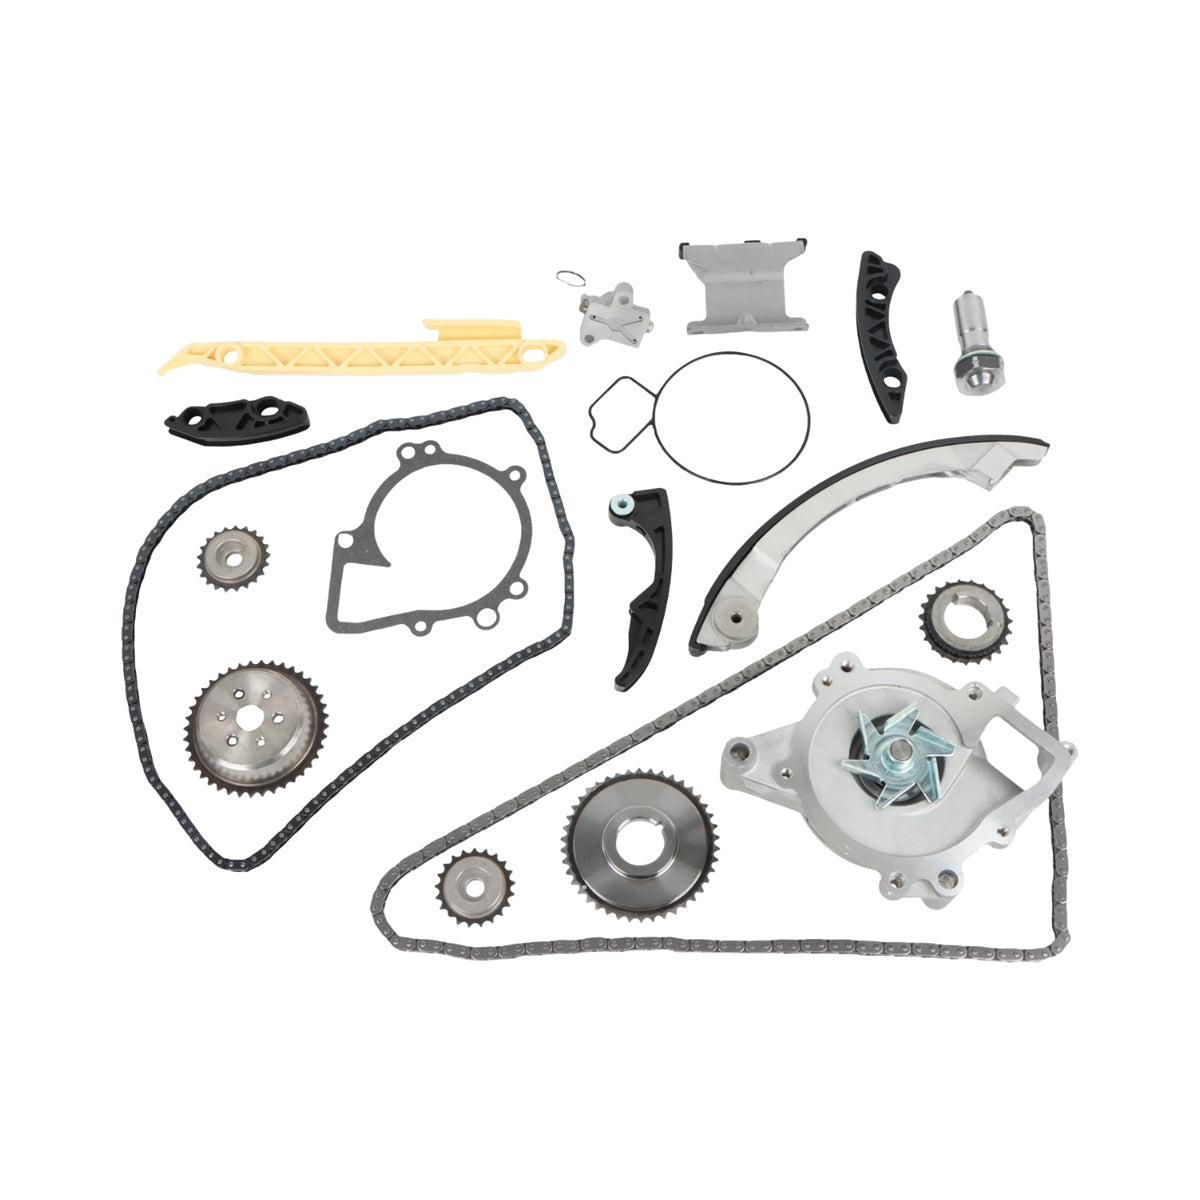 Daysyore Timing Chain Kit Water Pump, Timing Chain Kit Water Pump for 2006 to 2015, Timing Chain Kit Water Pump Chevrolet Equinox GMC 2.4L,Auto Timing Chain Kit Water Pump